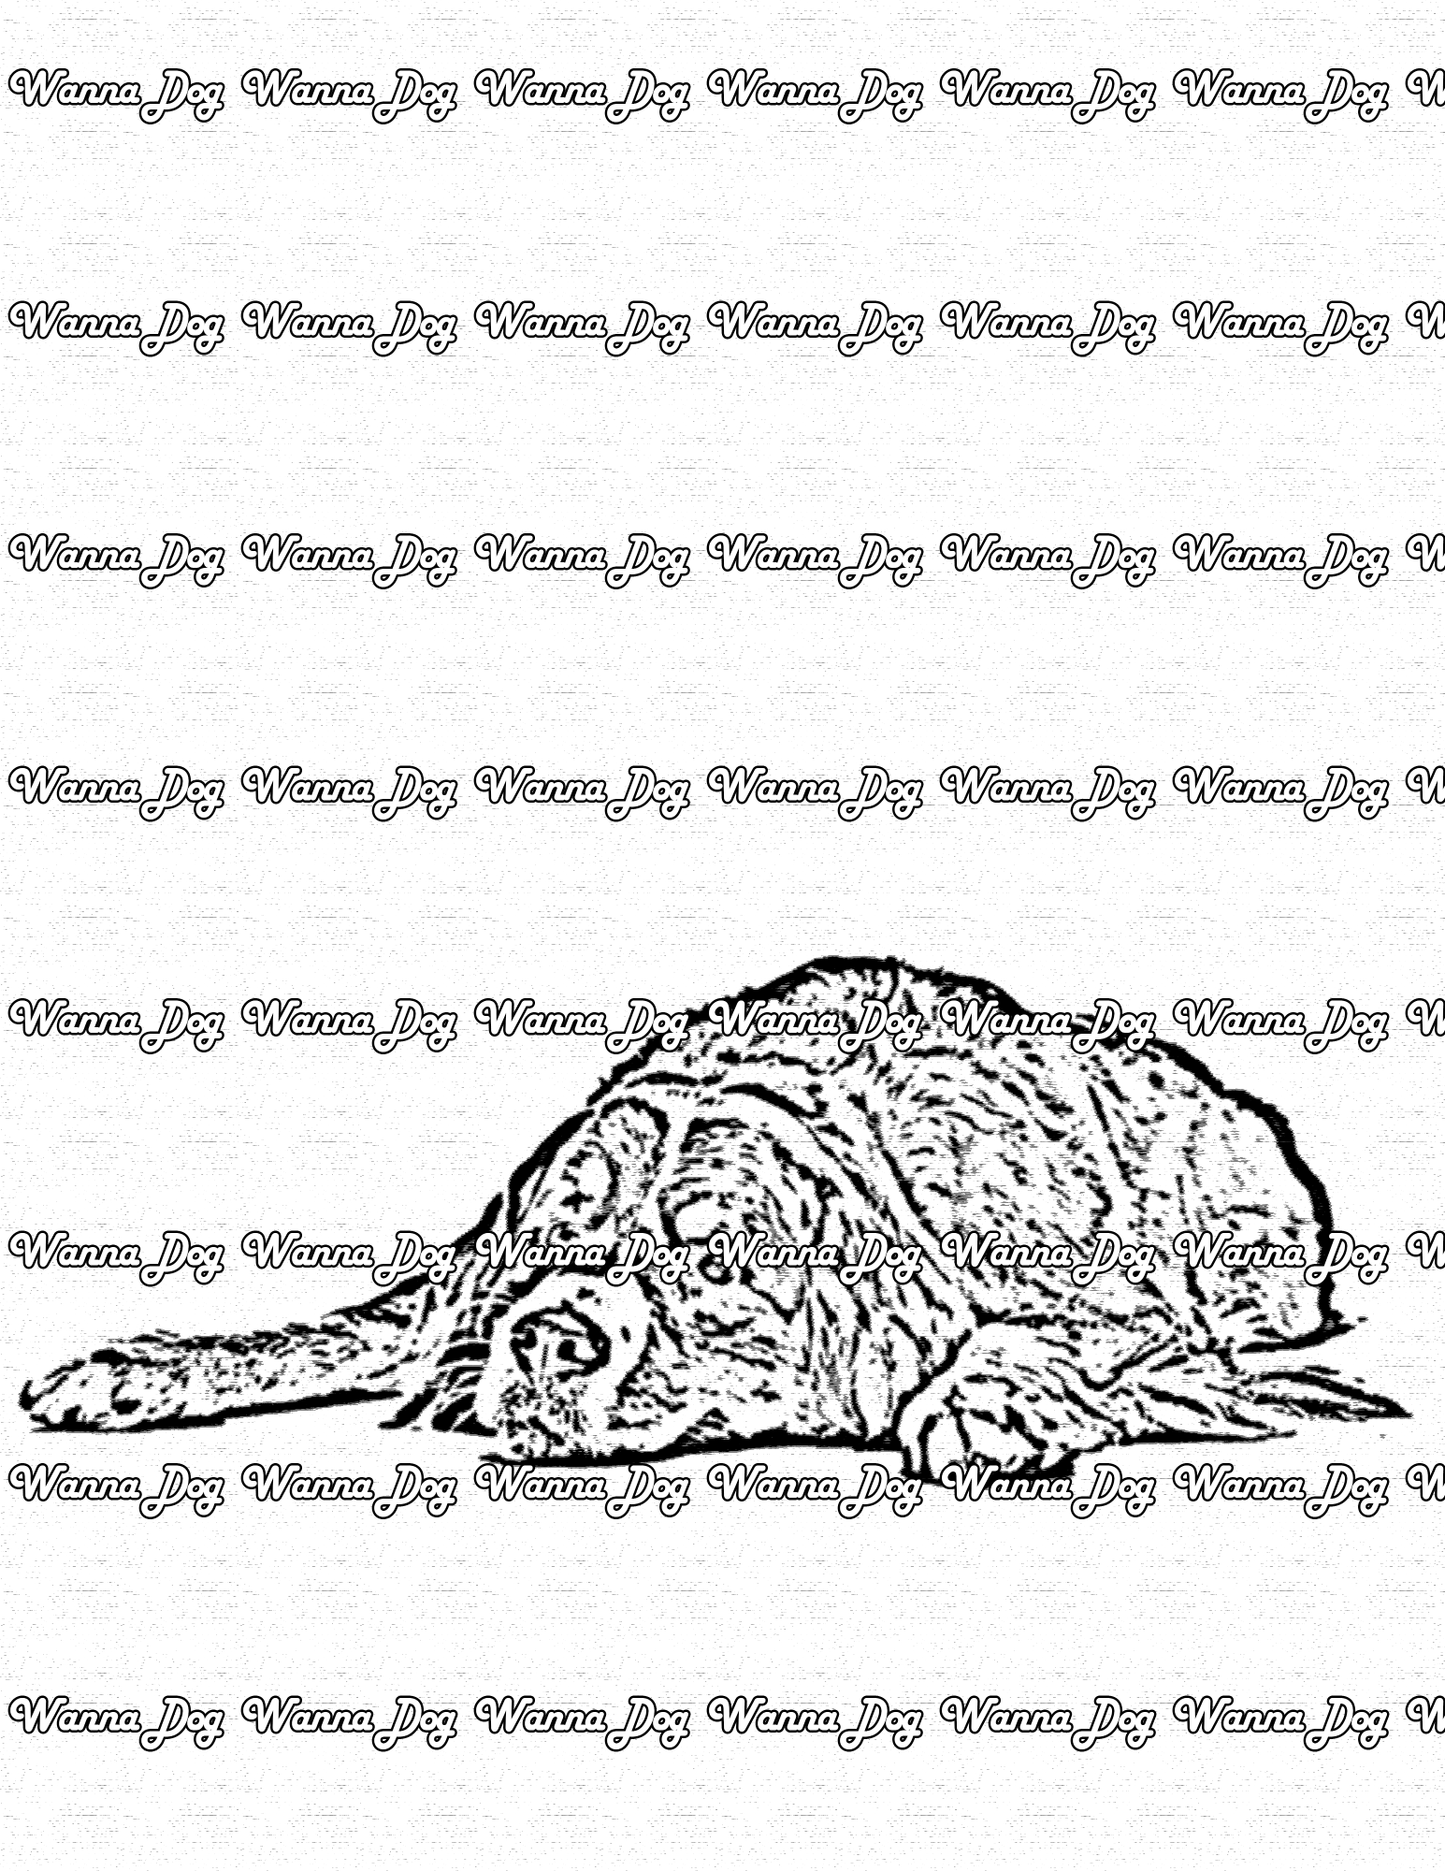 Bernese Mountain Dog Coloring Page of a Bernese Mountain Dog laying down and taking a nap